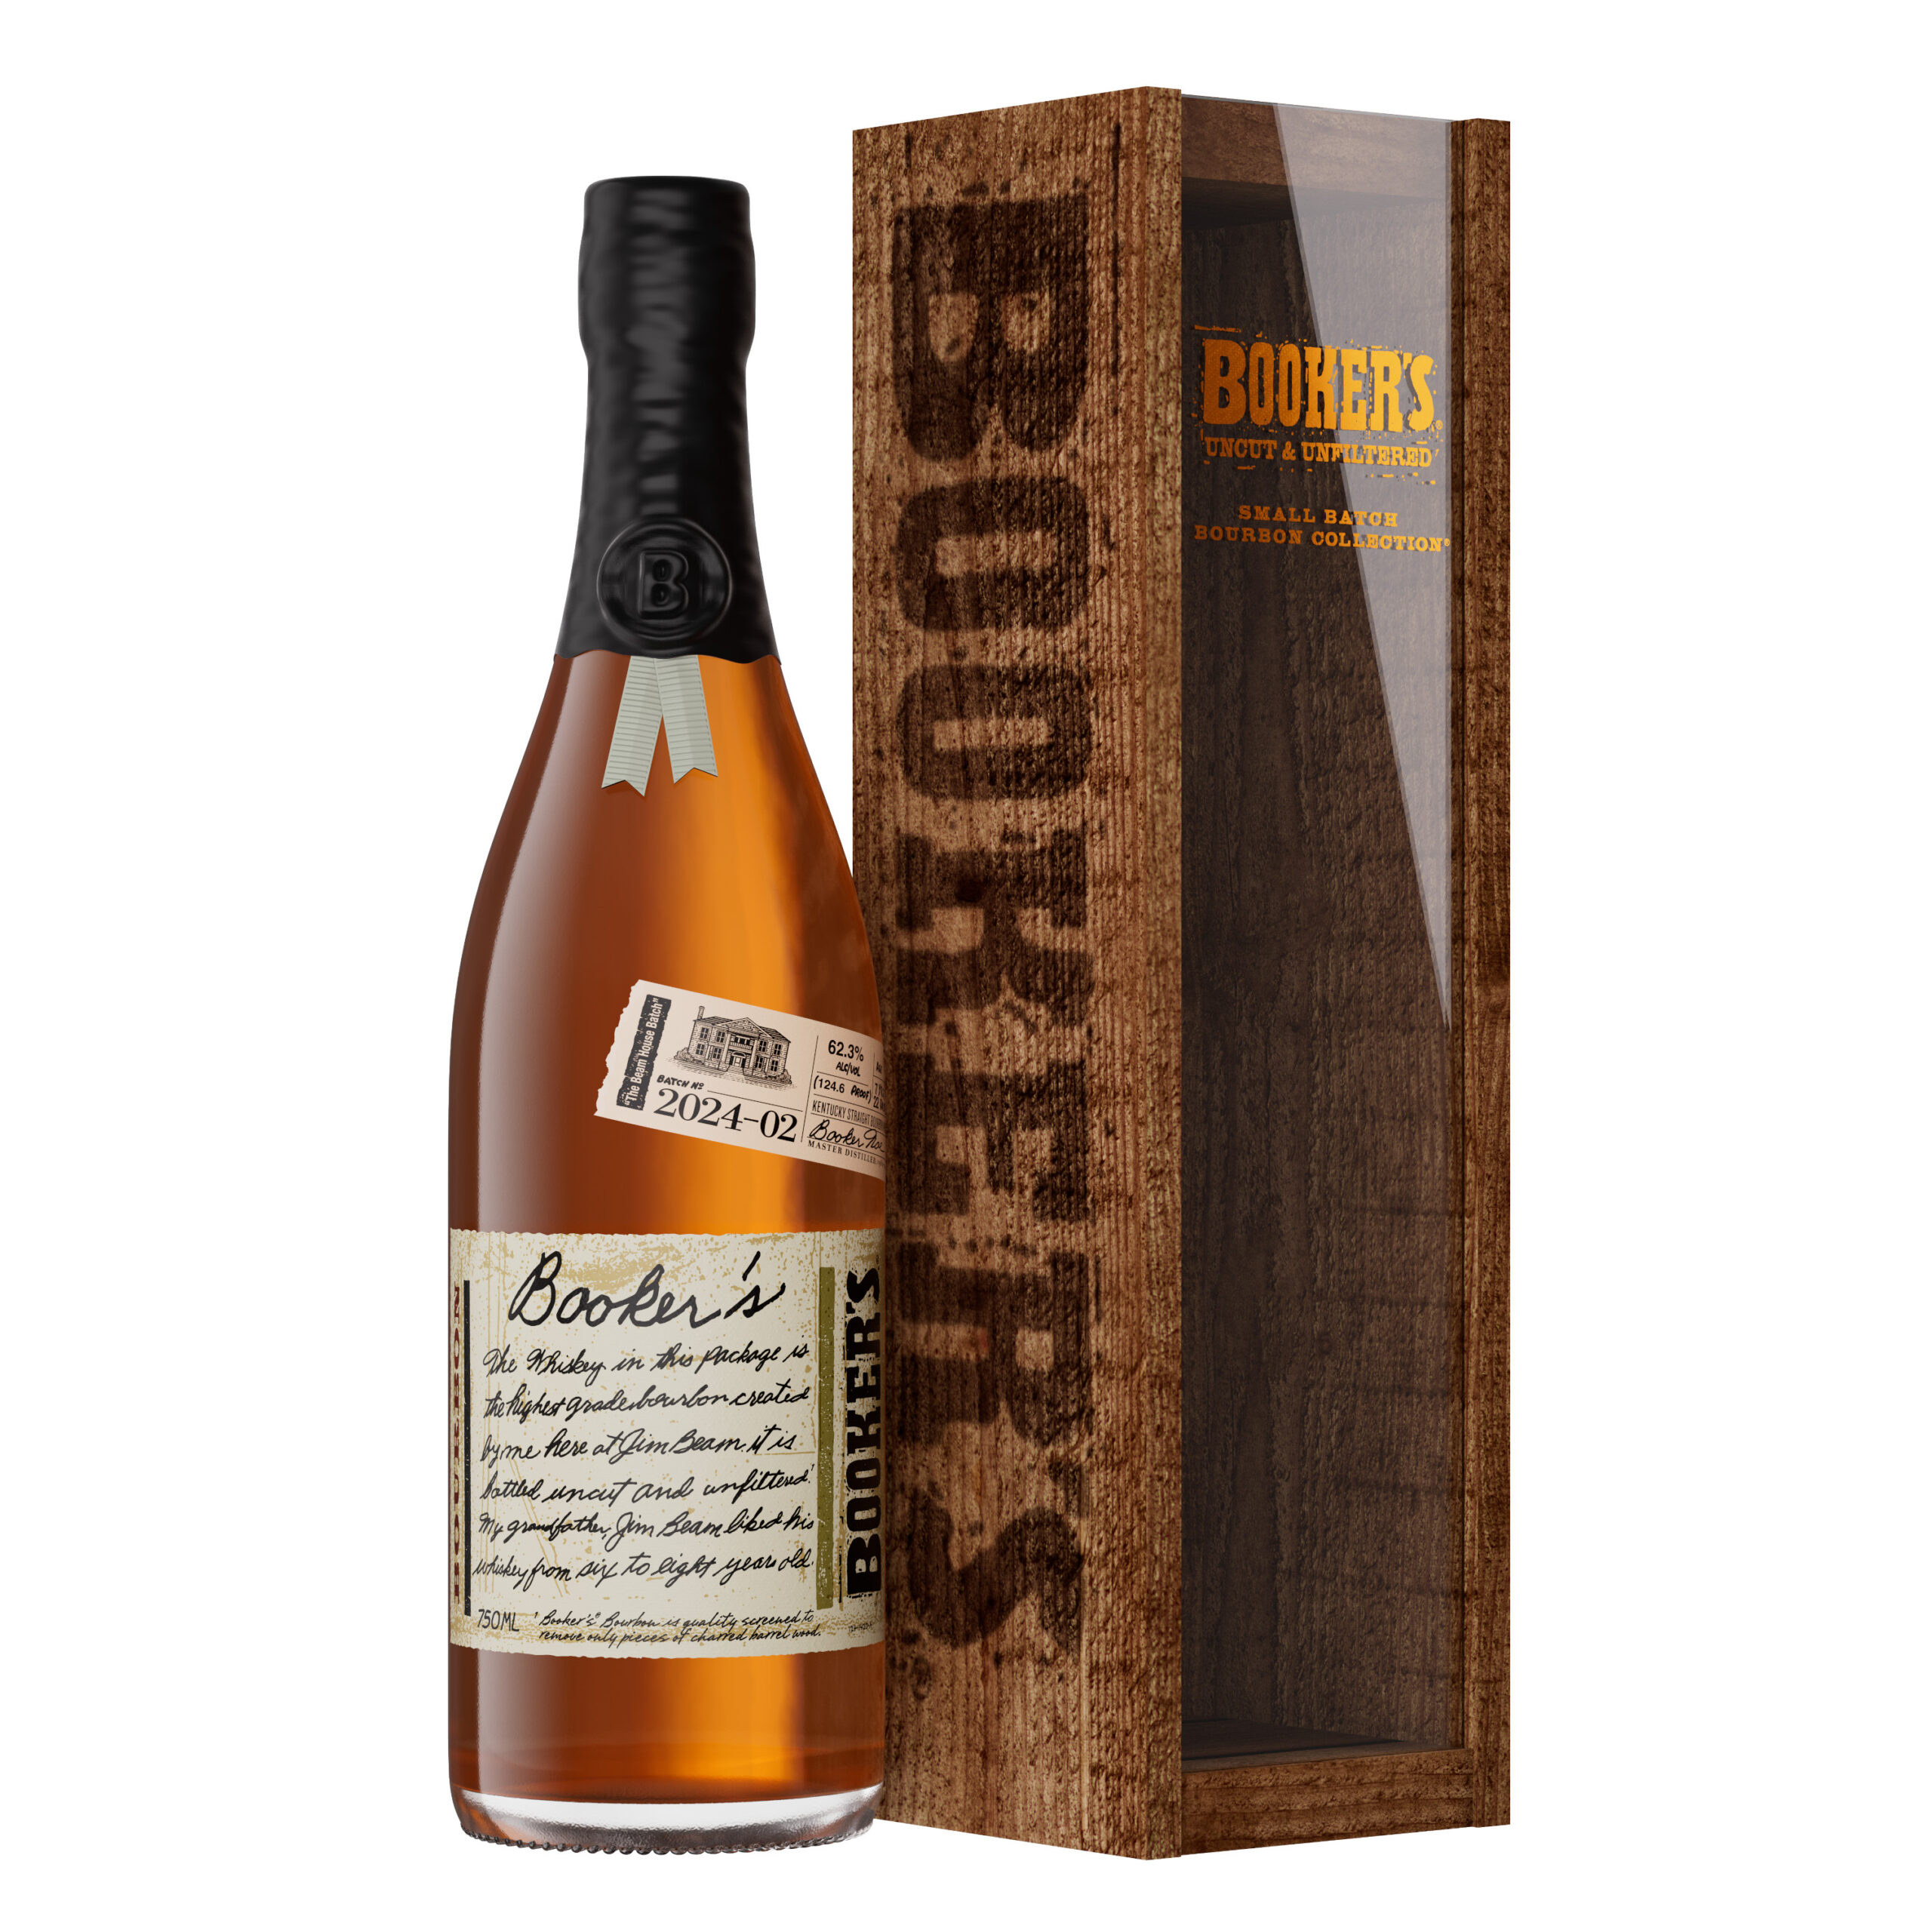 Booker's Beam House Batch bottle and box